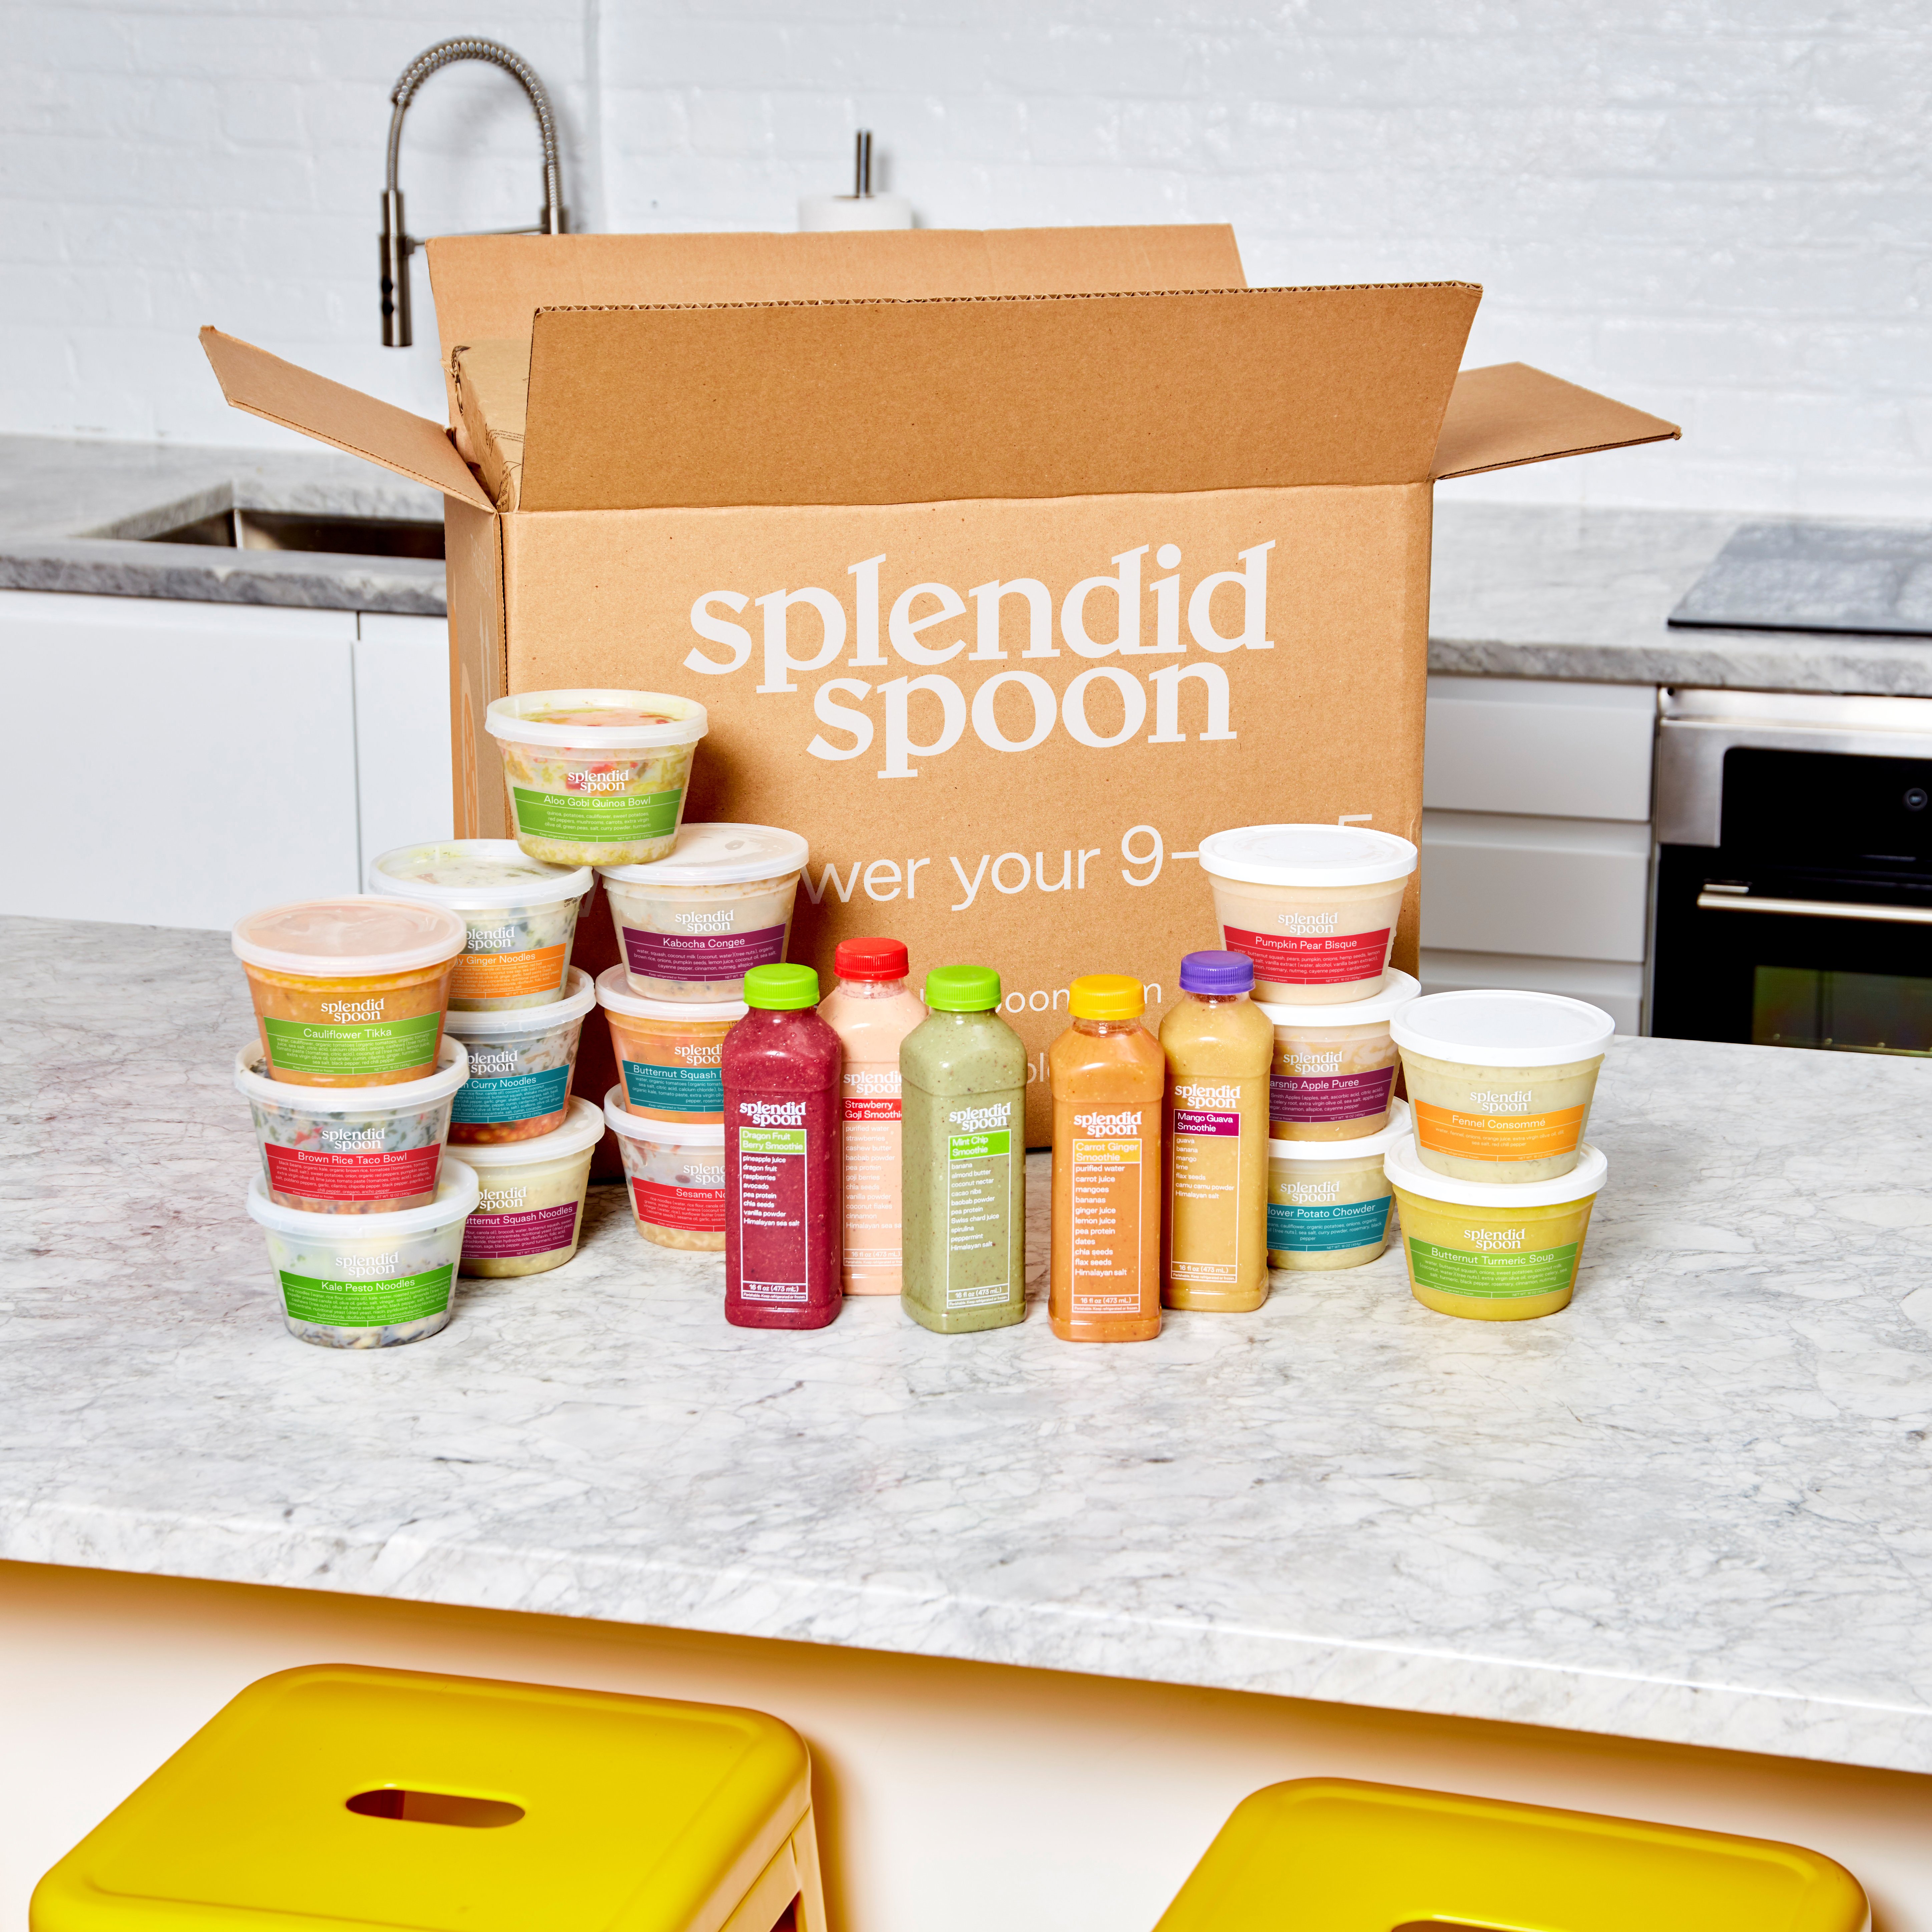 Splendid Spoon Review – Tasty & Nutritious Plant-Based Meals